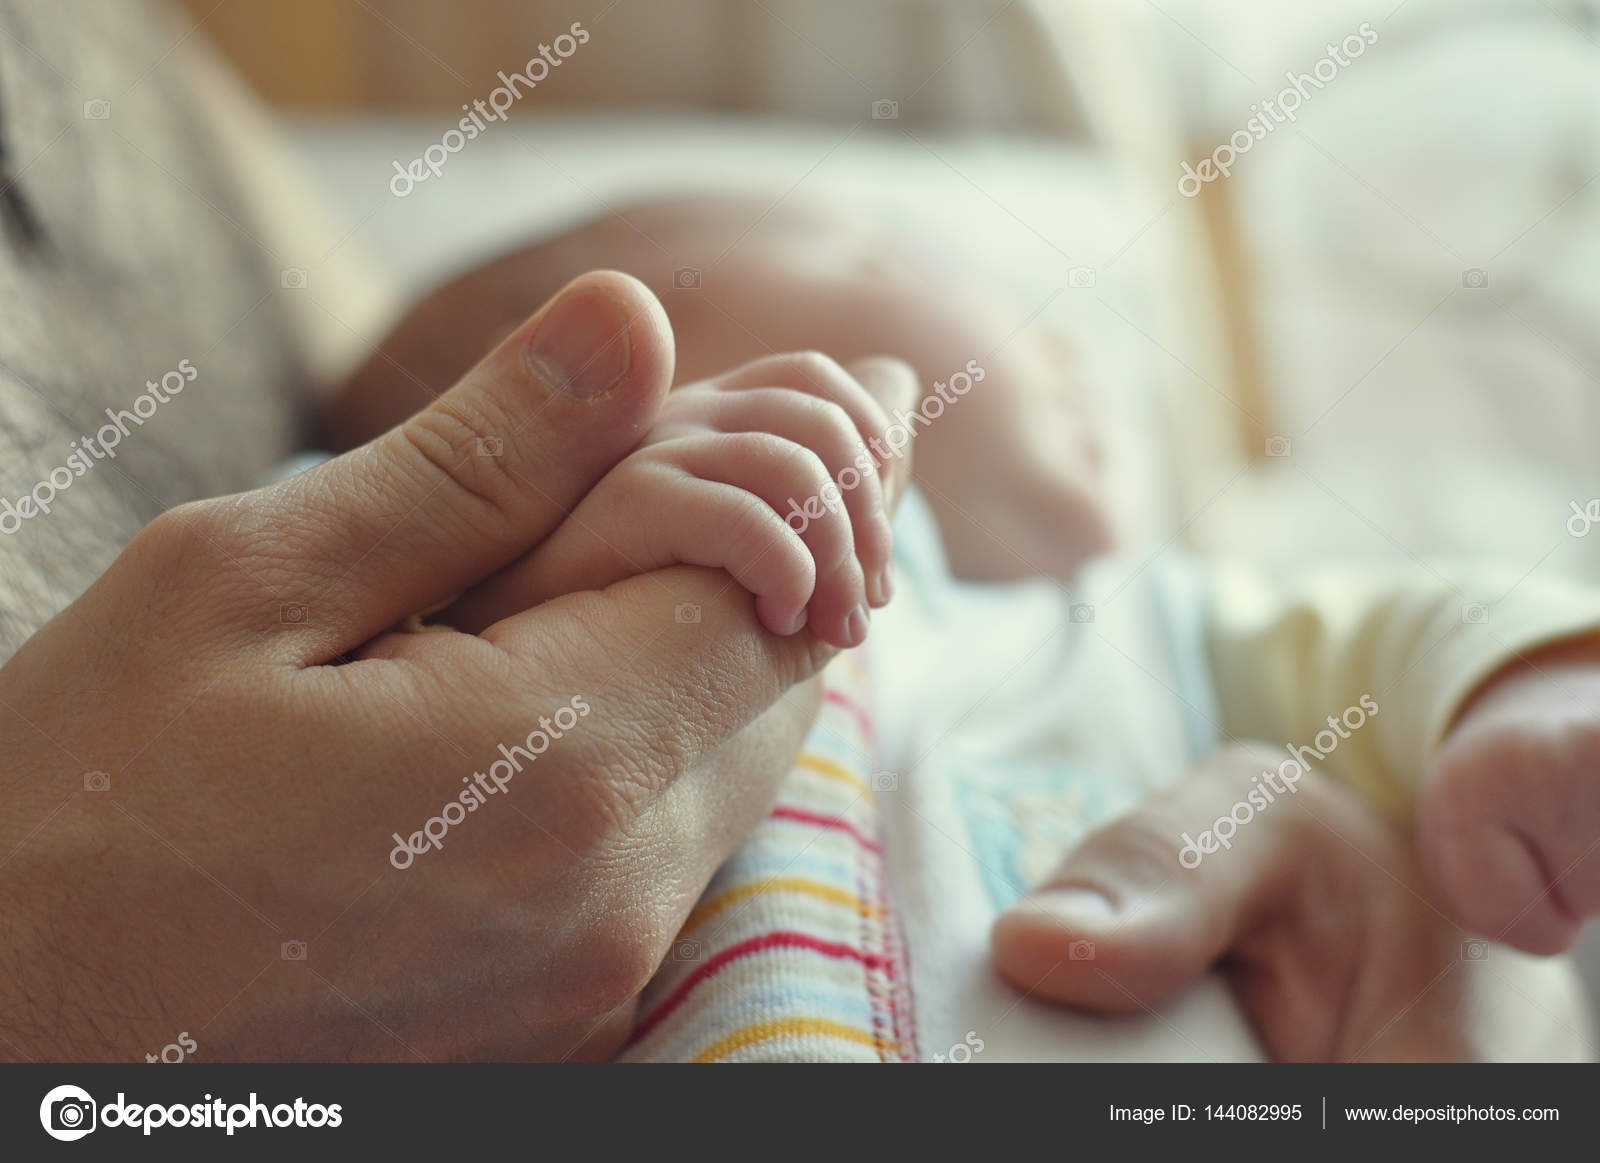 A father holds his baby's hand